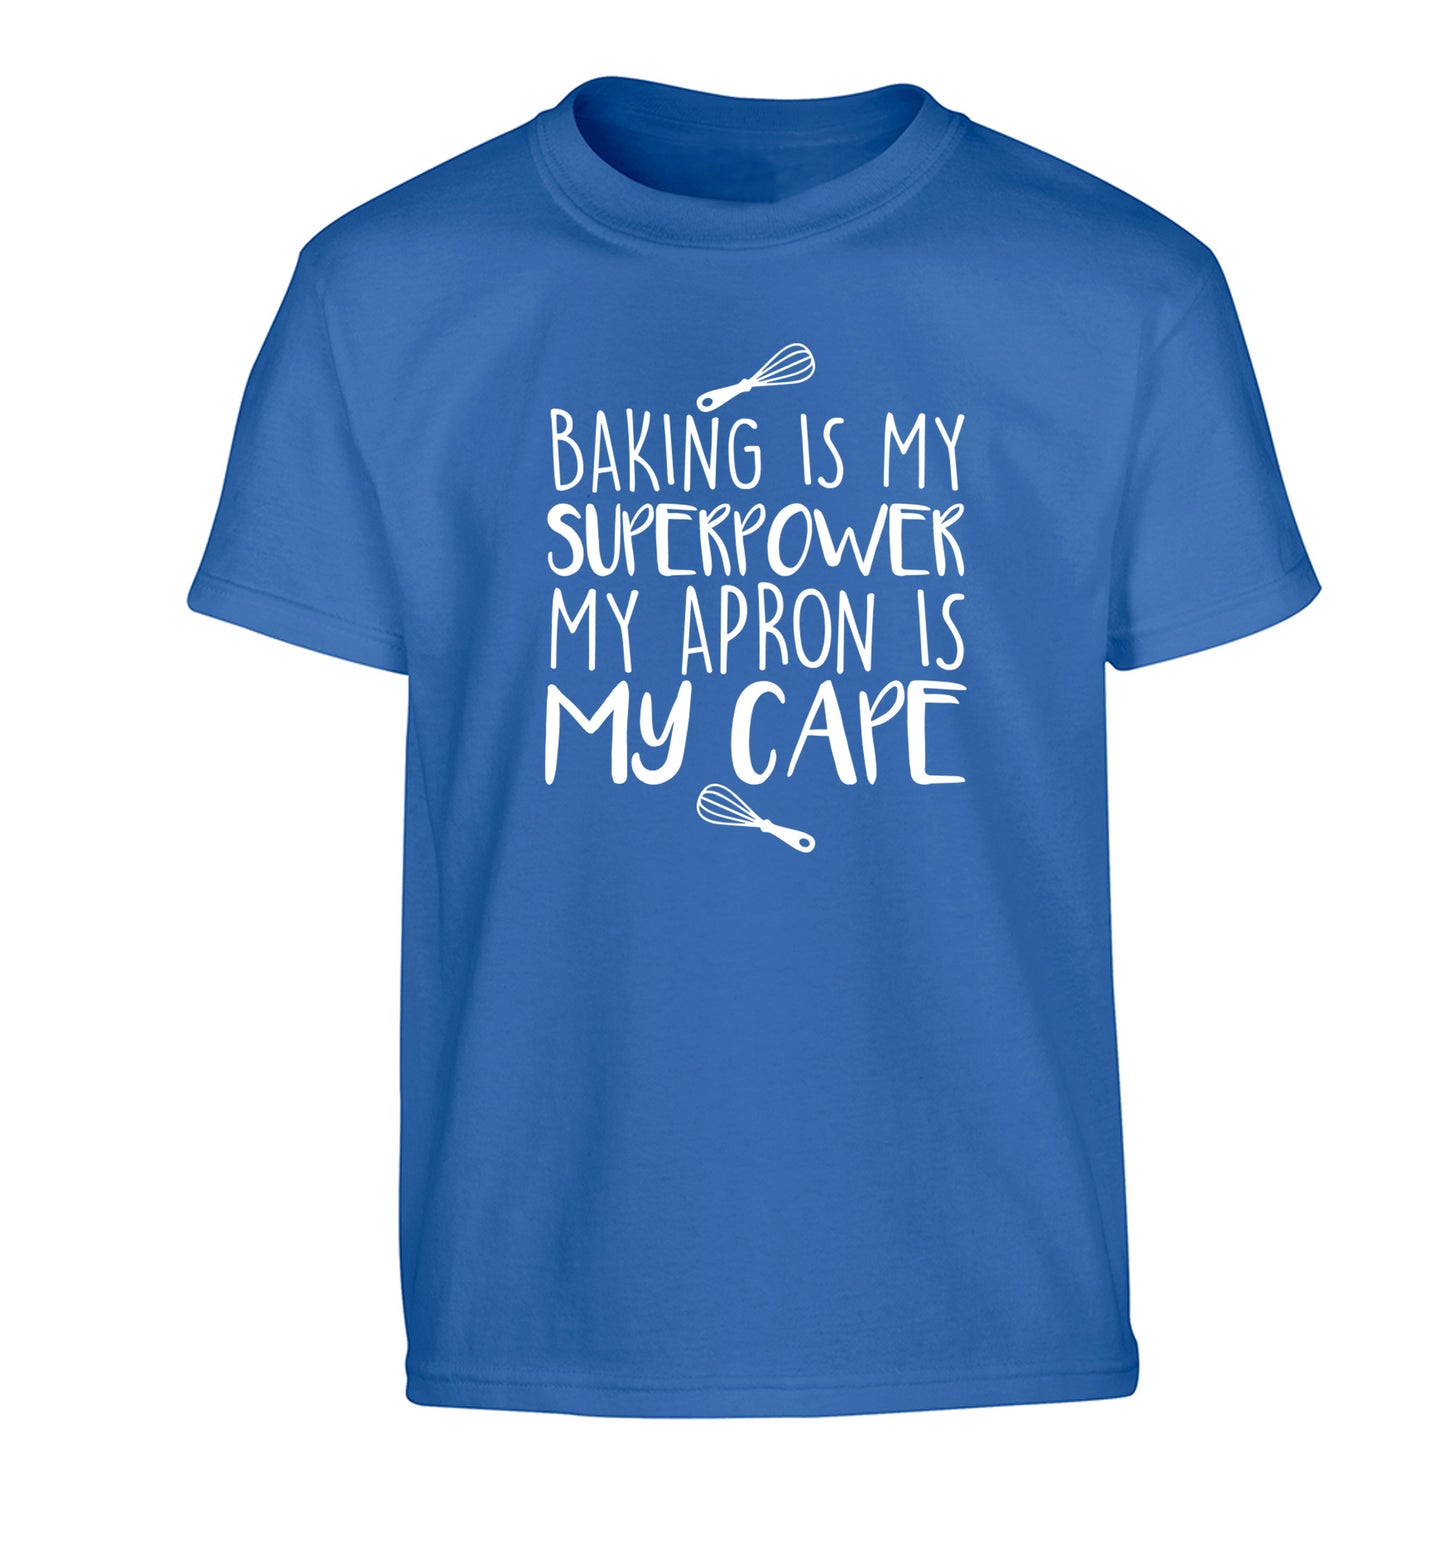 Baking is my superpower my apron is my cape Children's blue Tshirt 12-14 Years